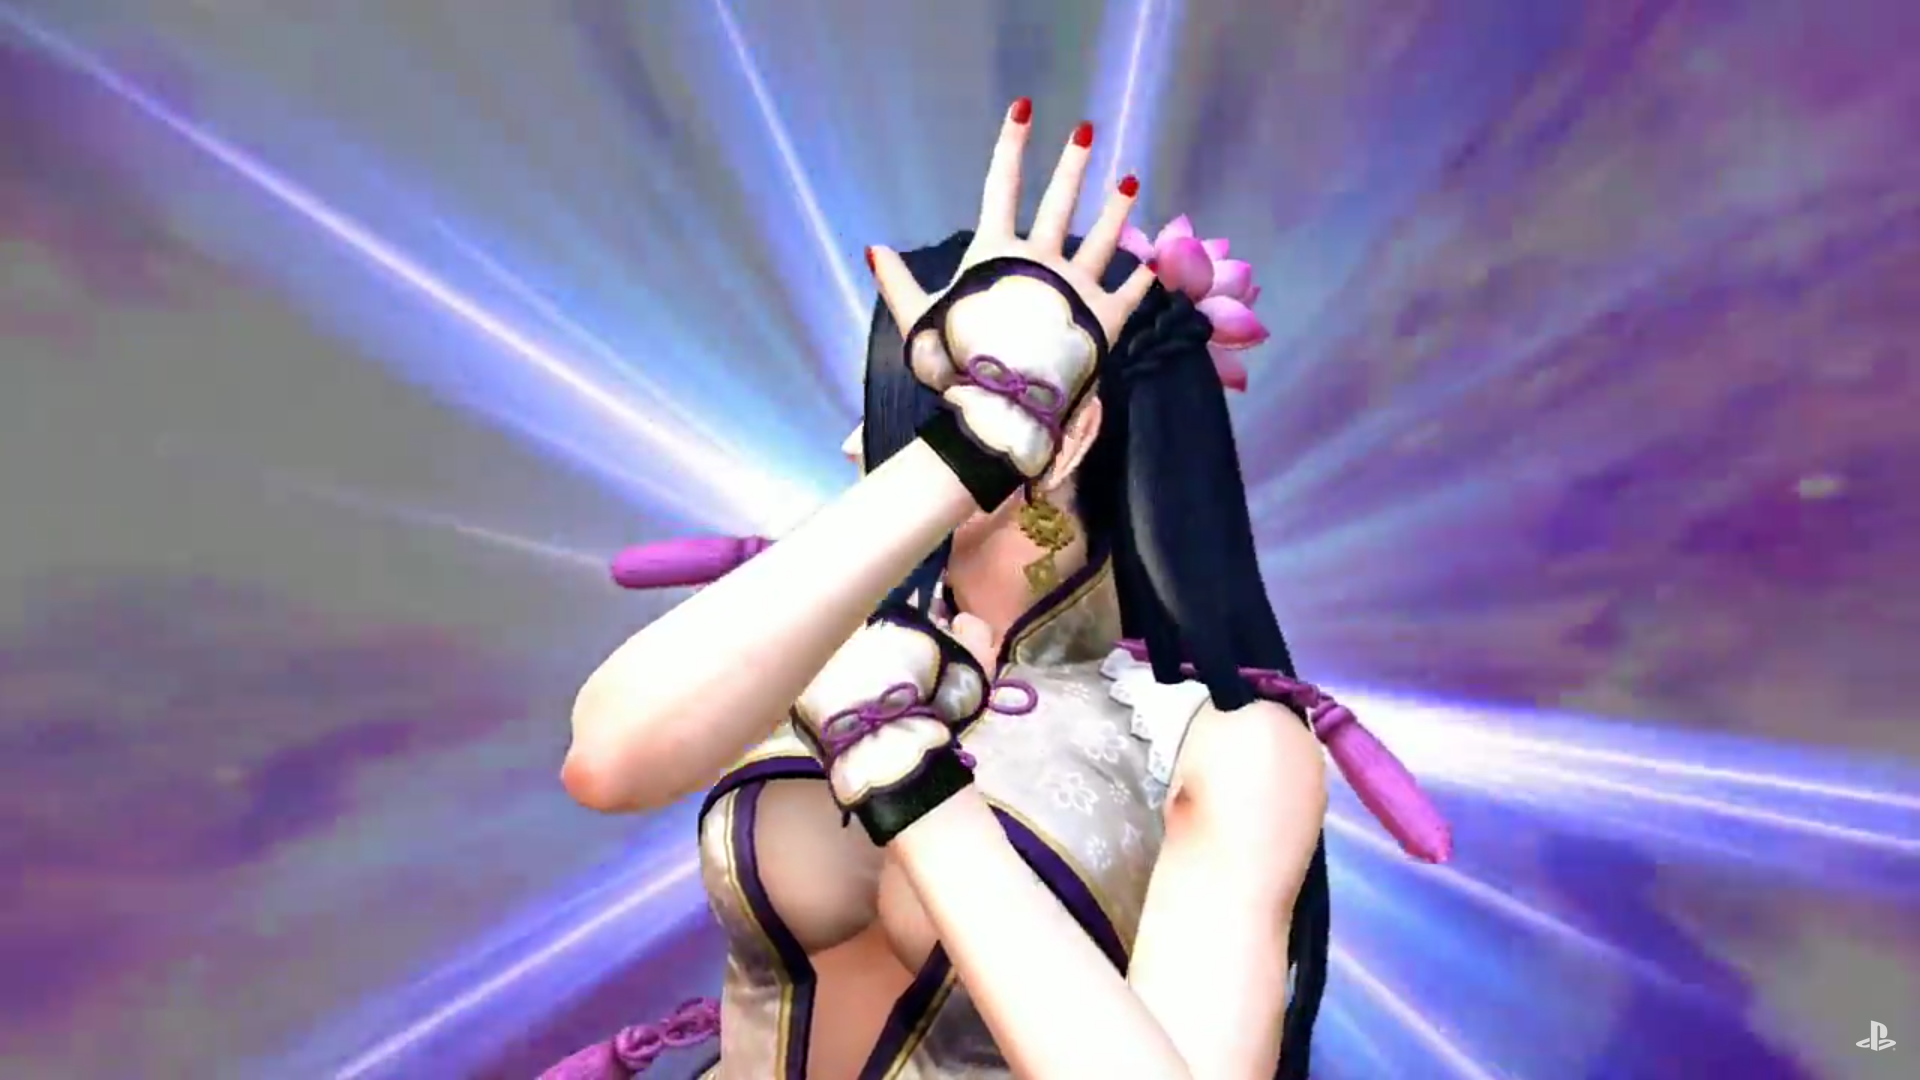 King of Fighters 14 Athena, Luong and Nelson Character Reveal 4.